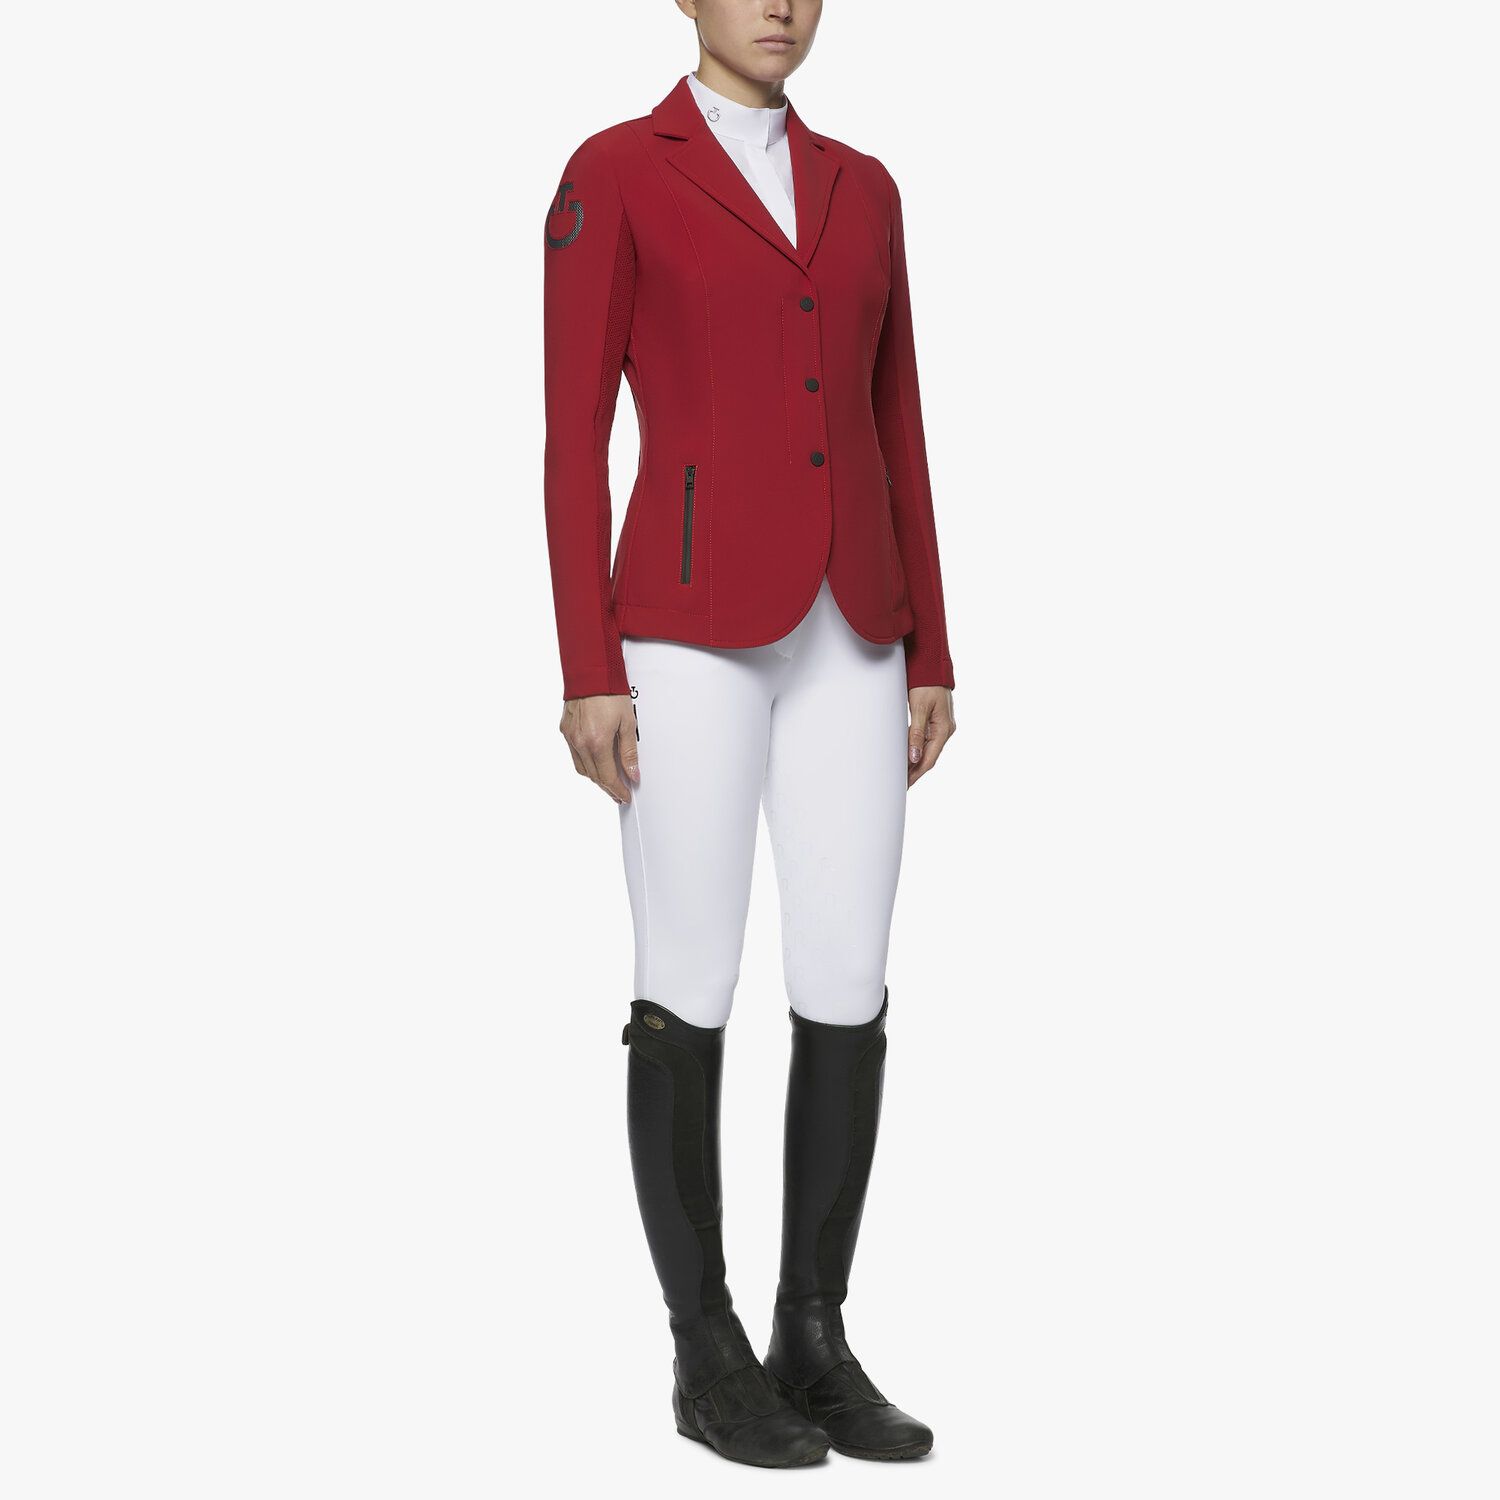 Cavalleria Toscana Women's zip riding jacket with technical knit inserts RED-2